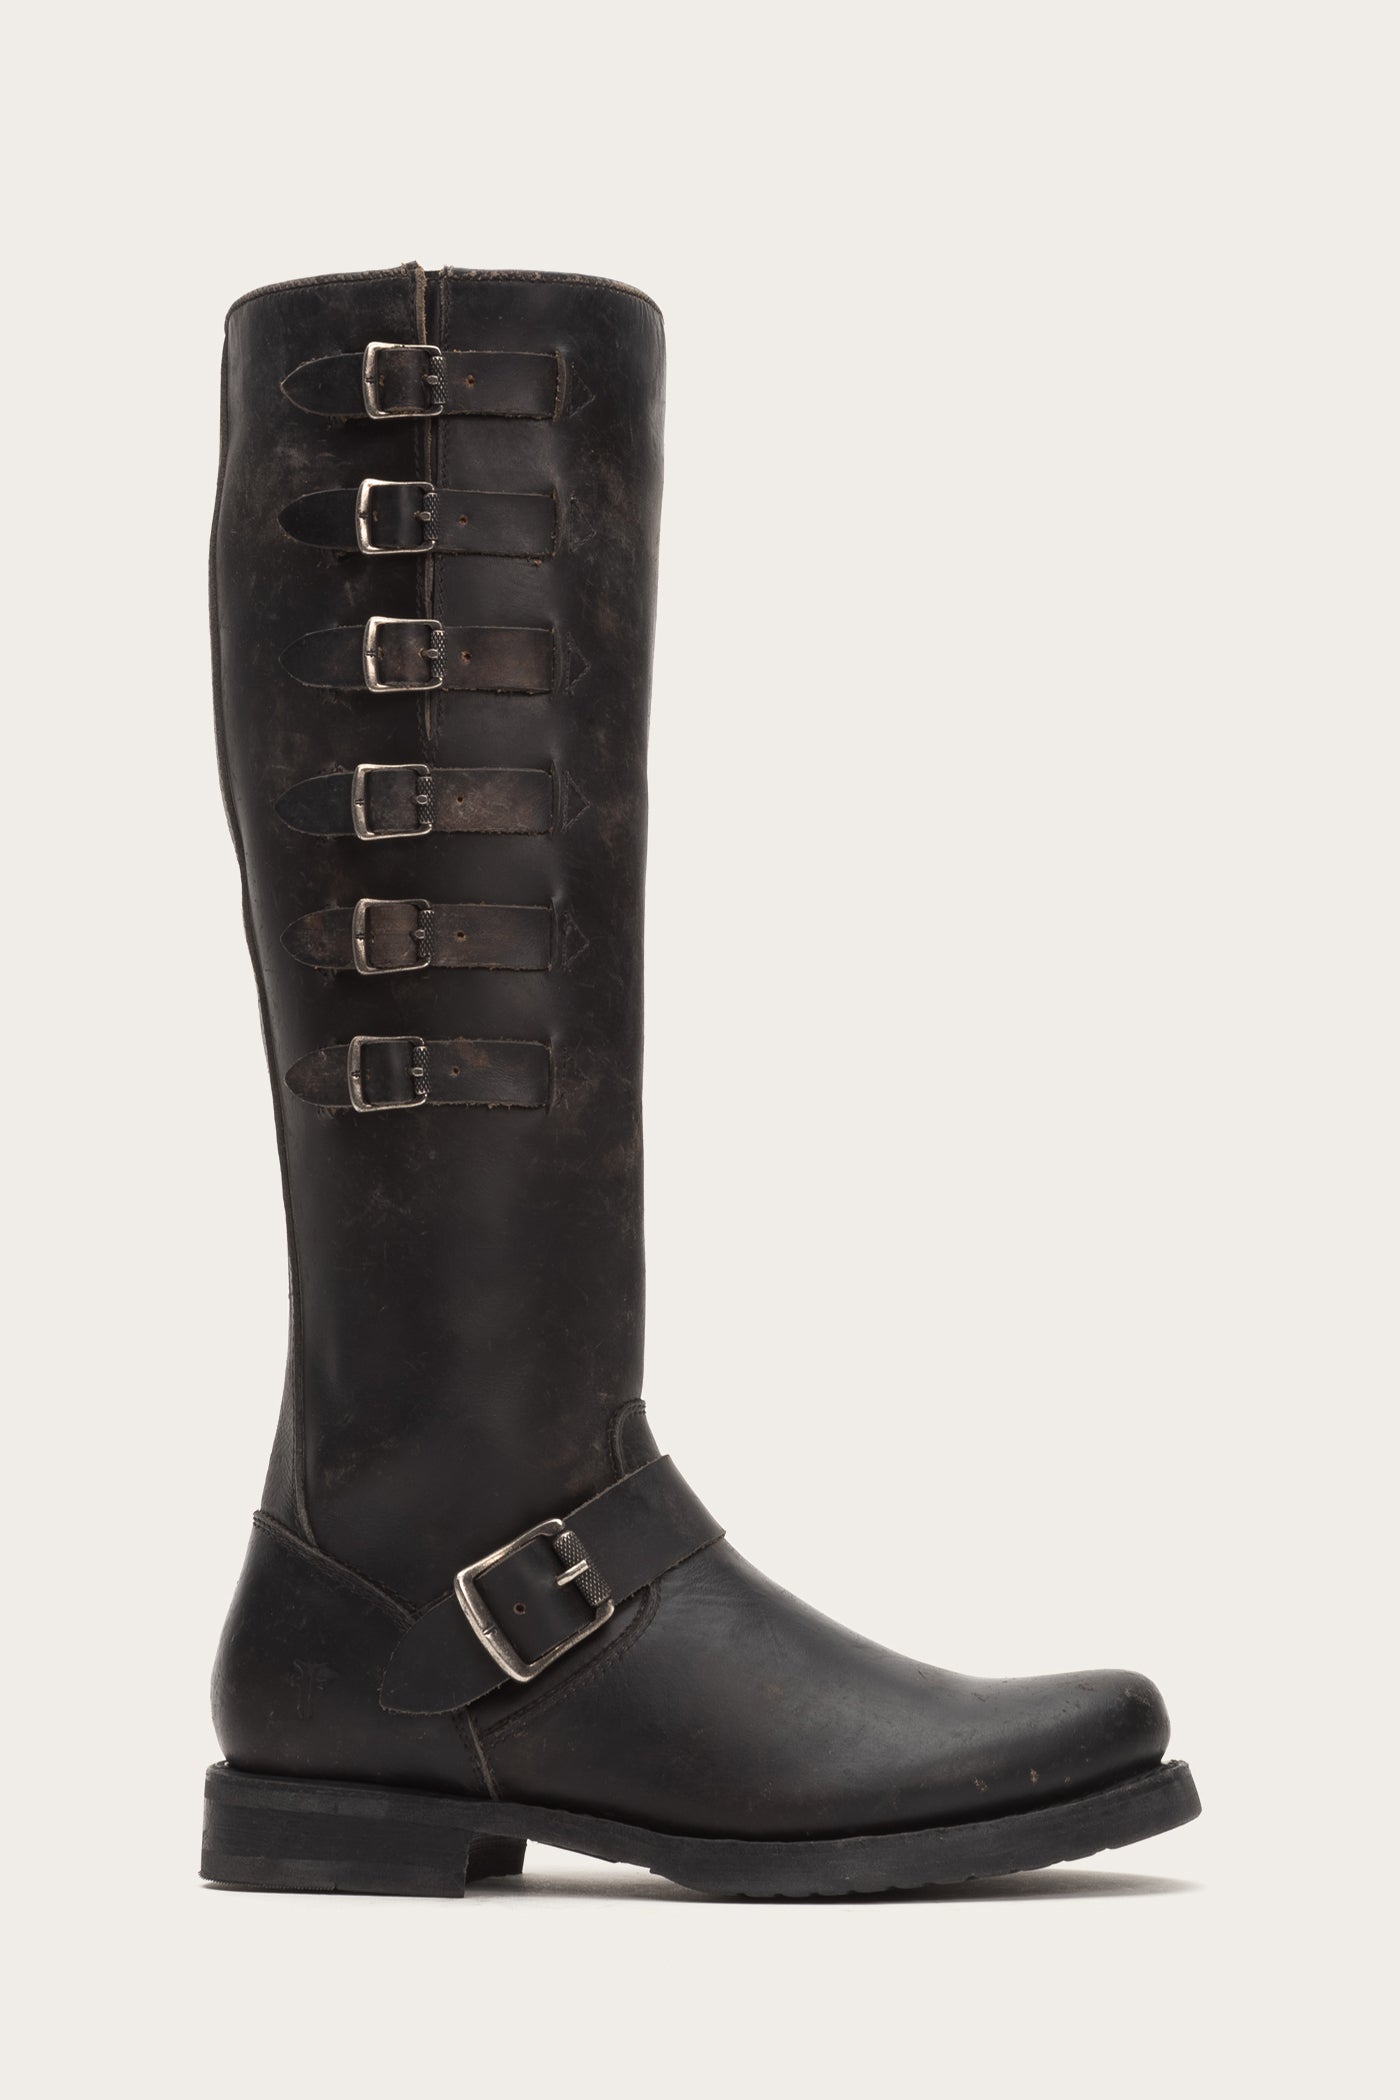 Veronica Belted Tall | FRYE Since 1863